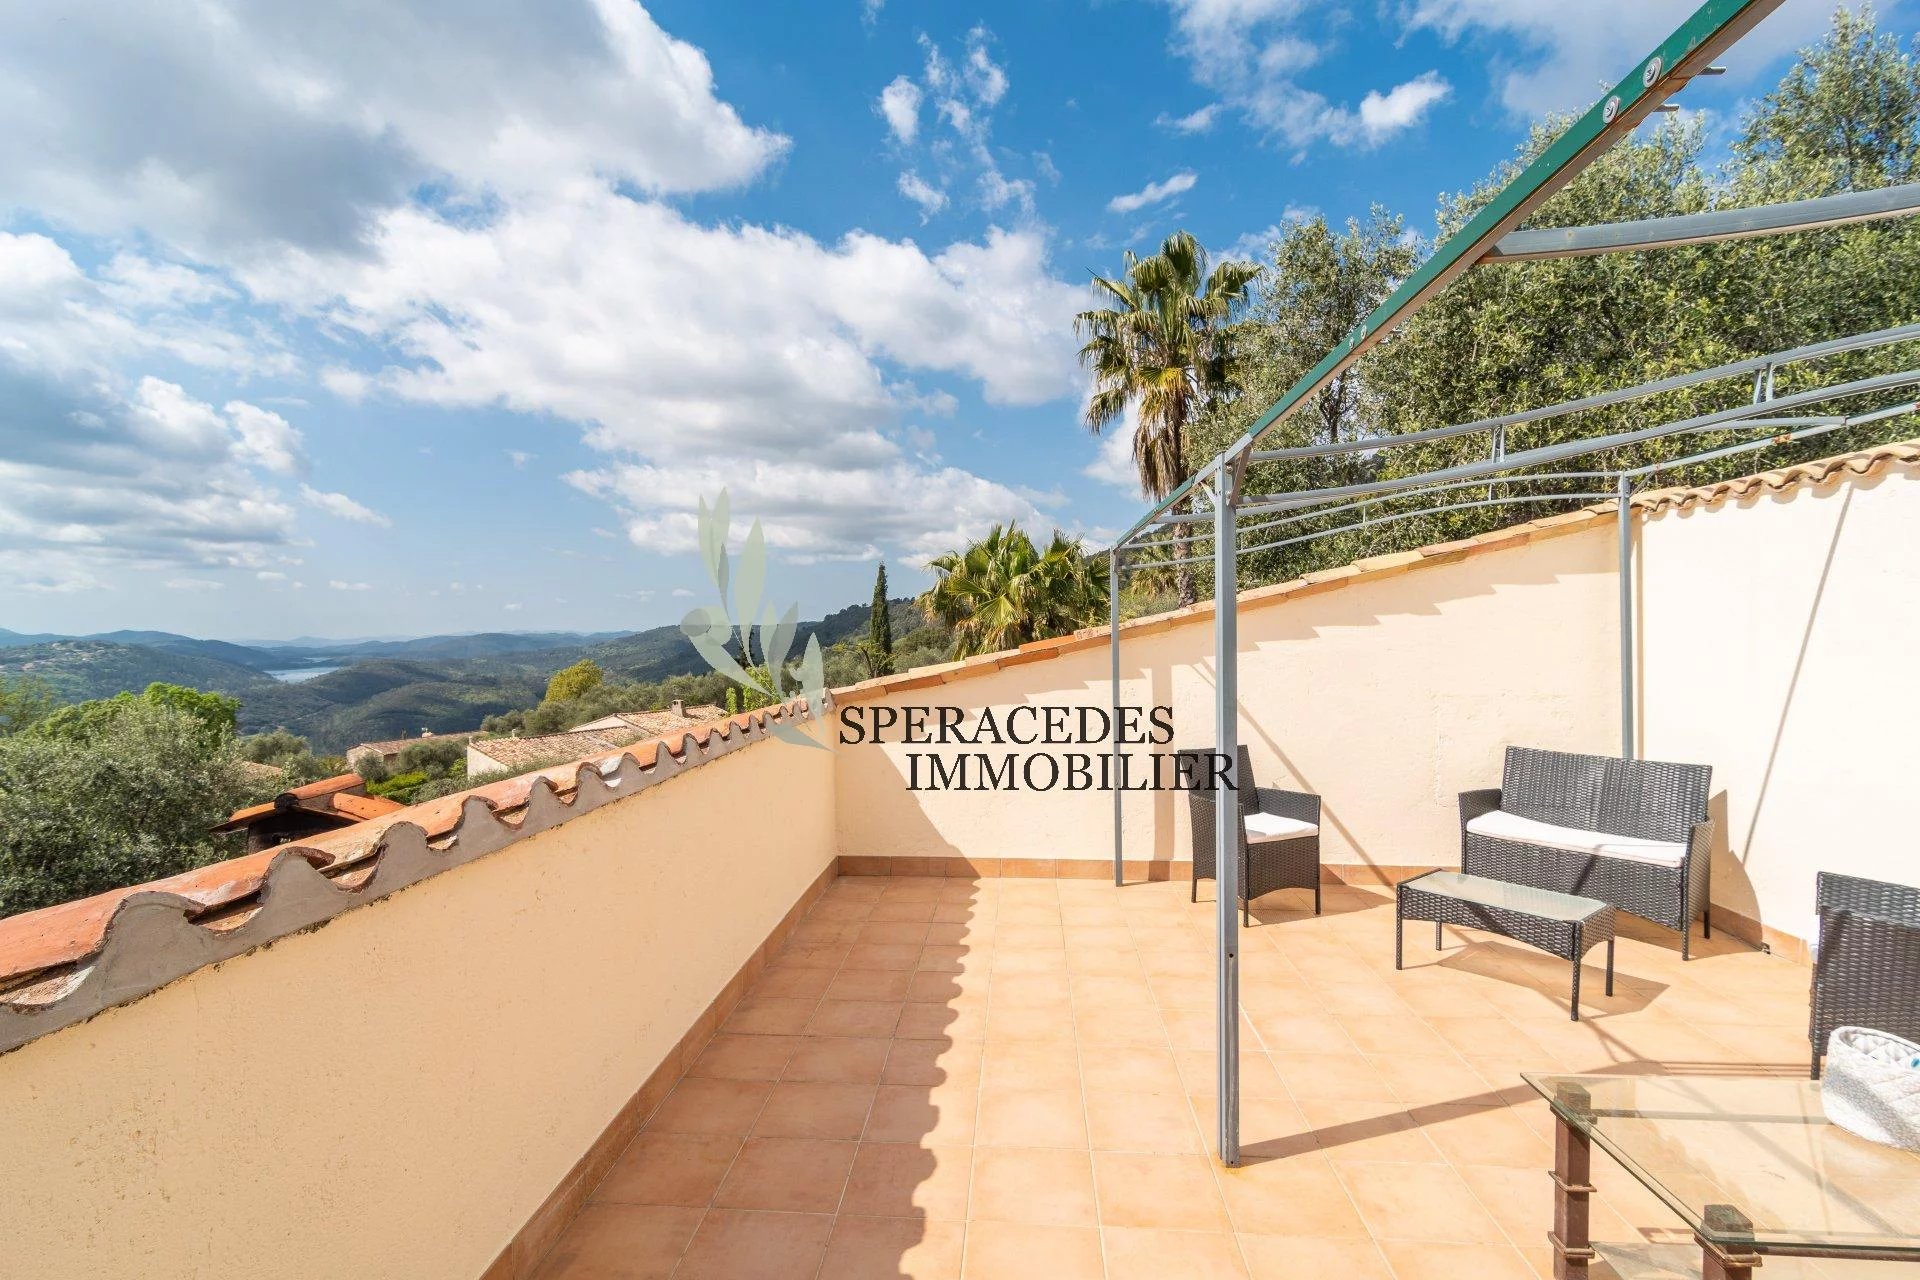 immobilier photographe immobilier